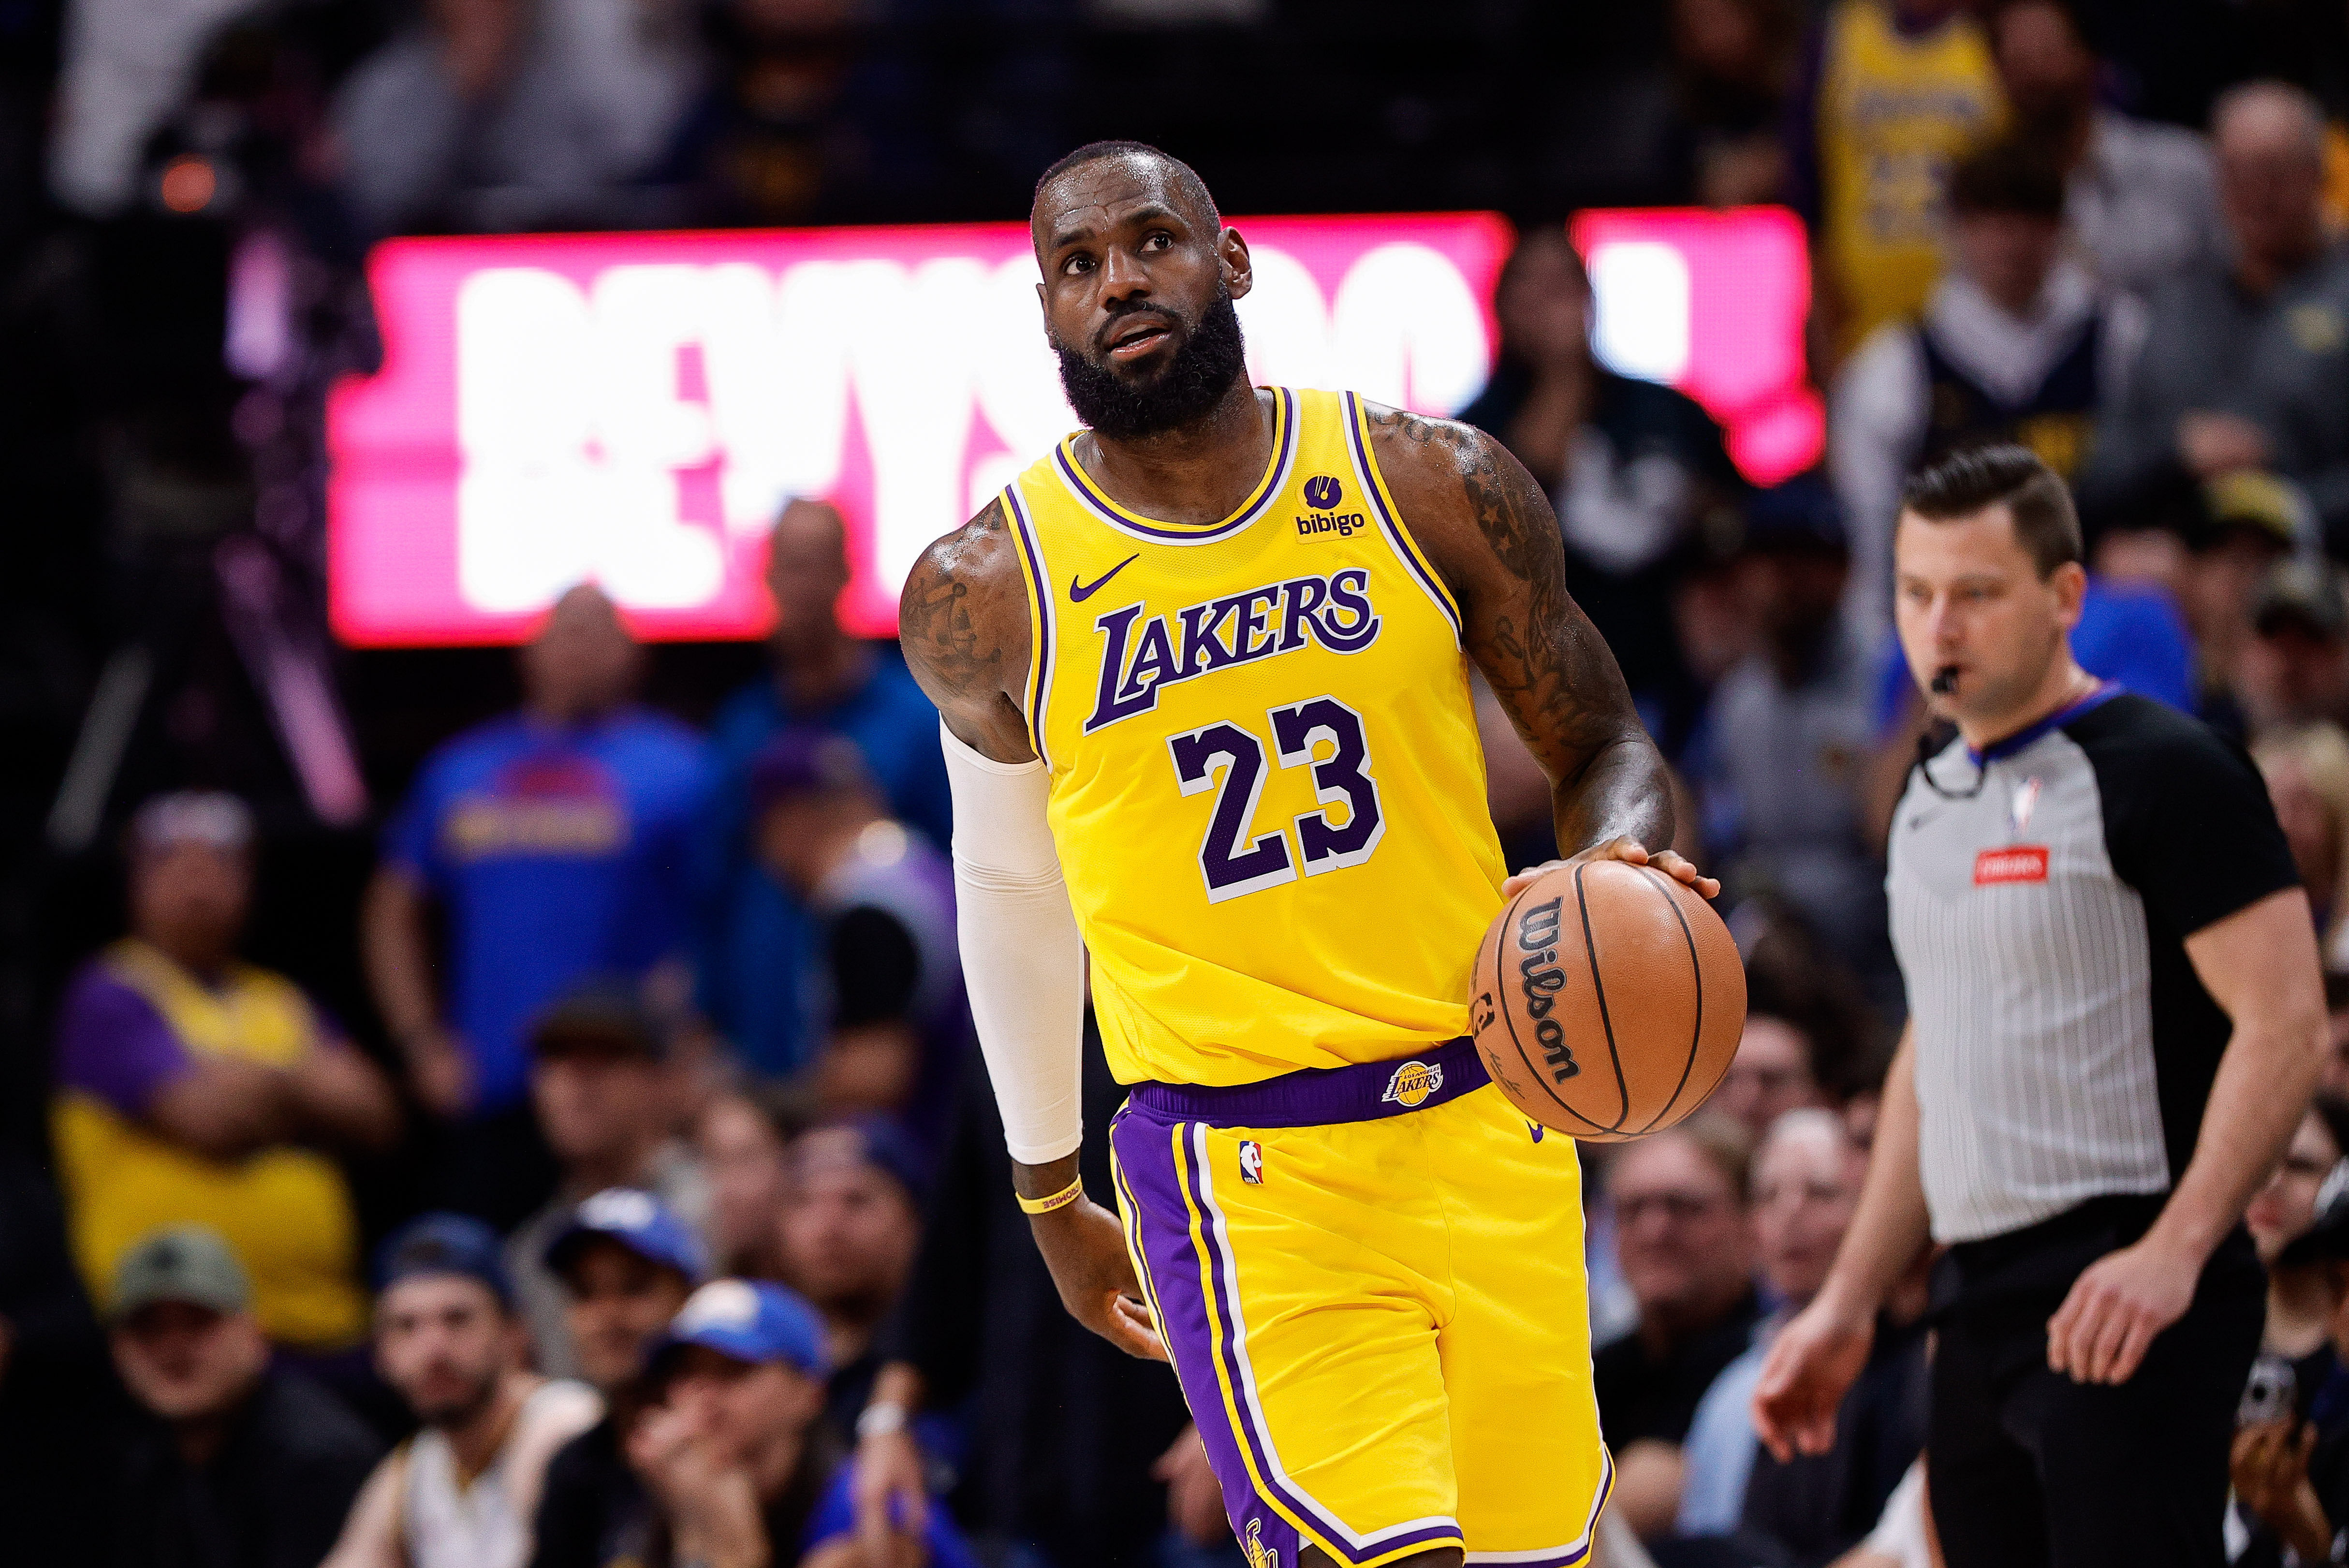 "LeBron James whisperer" claims Lakers star is set to Free Agent